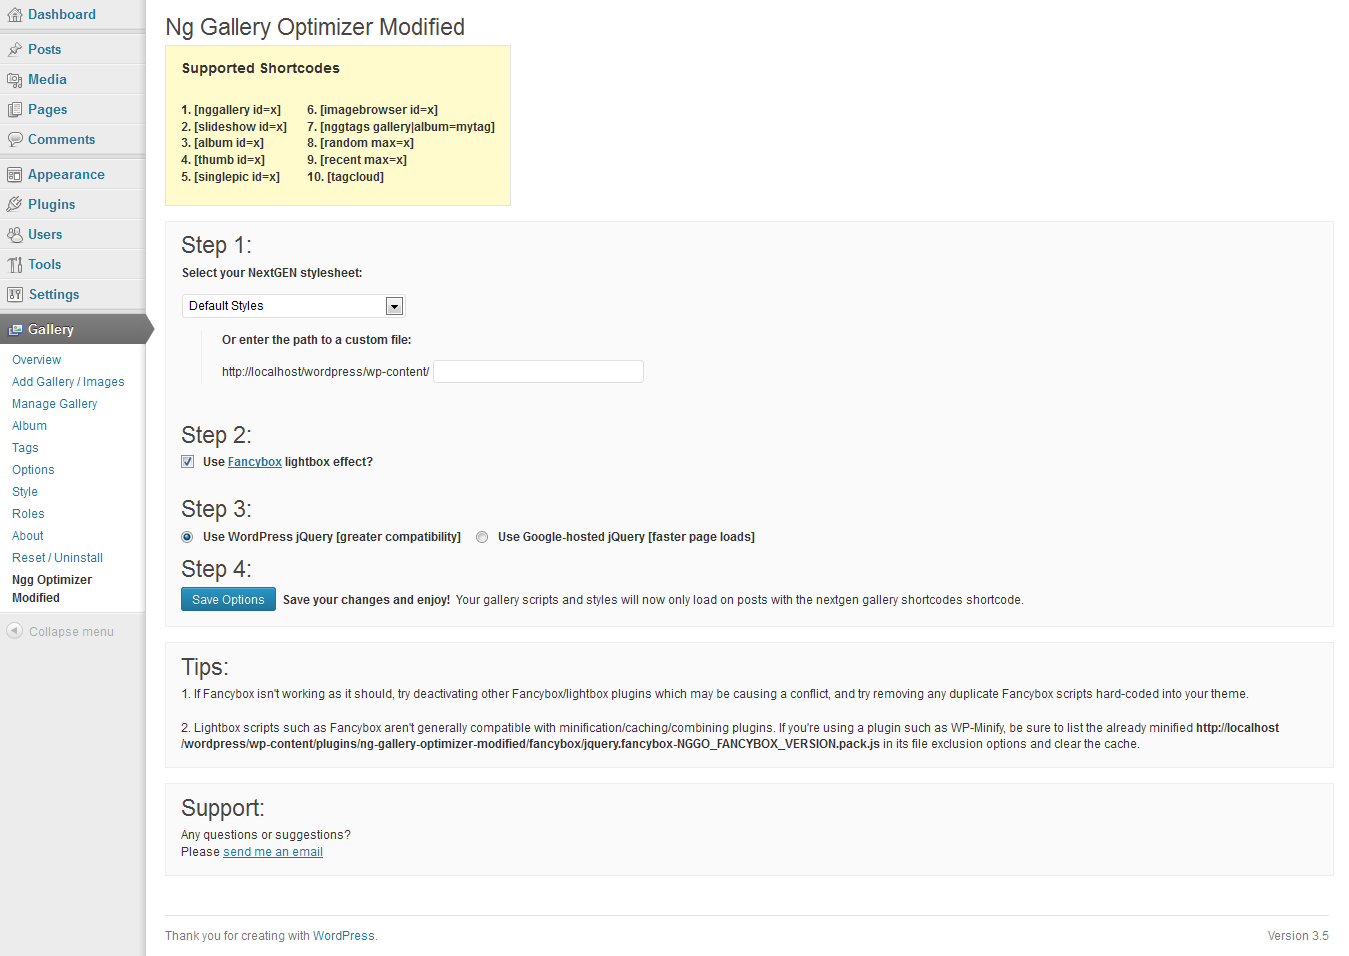 Ng Gallery Optimizer Modified settings page.